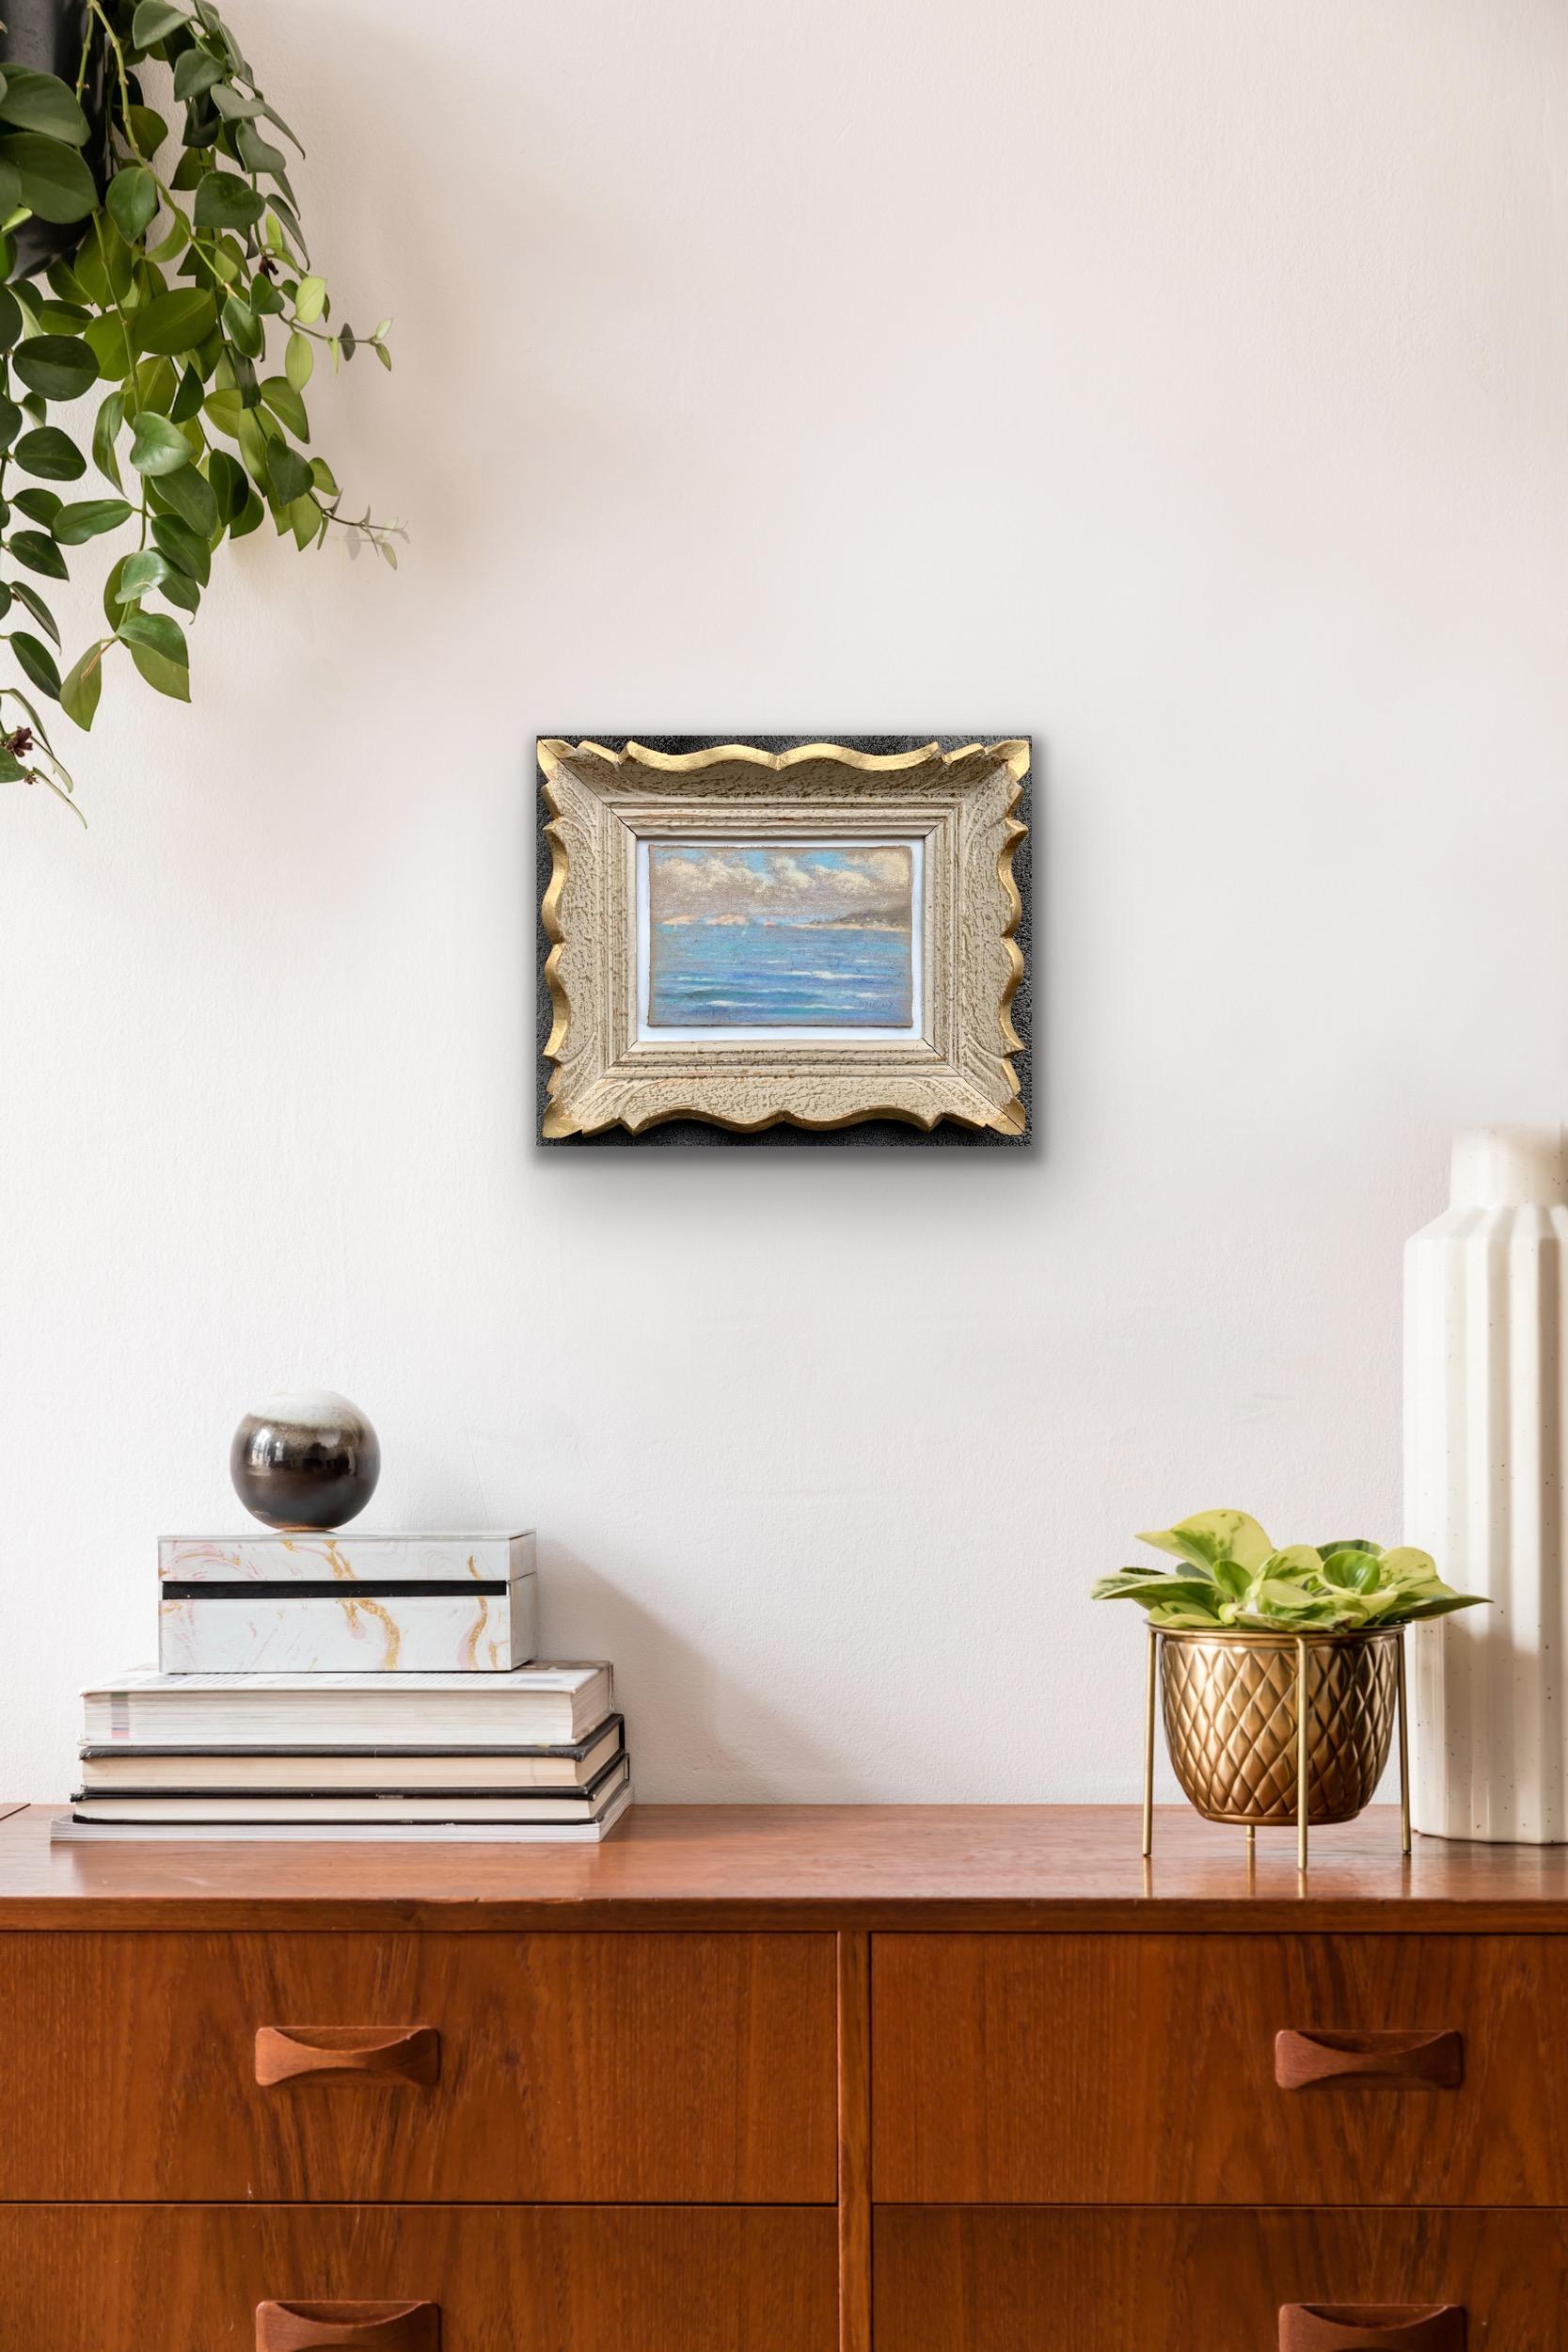 Beautifully vibrant little French impressionist pastel painting depicting a costal view along the Mediterranean Sea. Housed in a beautifully matching frame. Signed lower right. This lovely impressionist painting is a peaceful and tranquil reflection